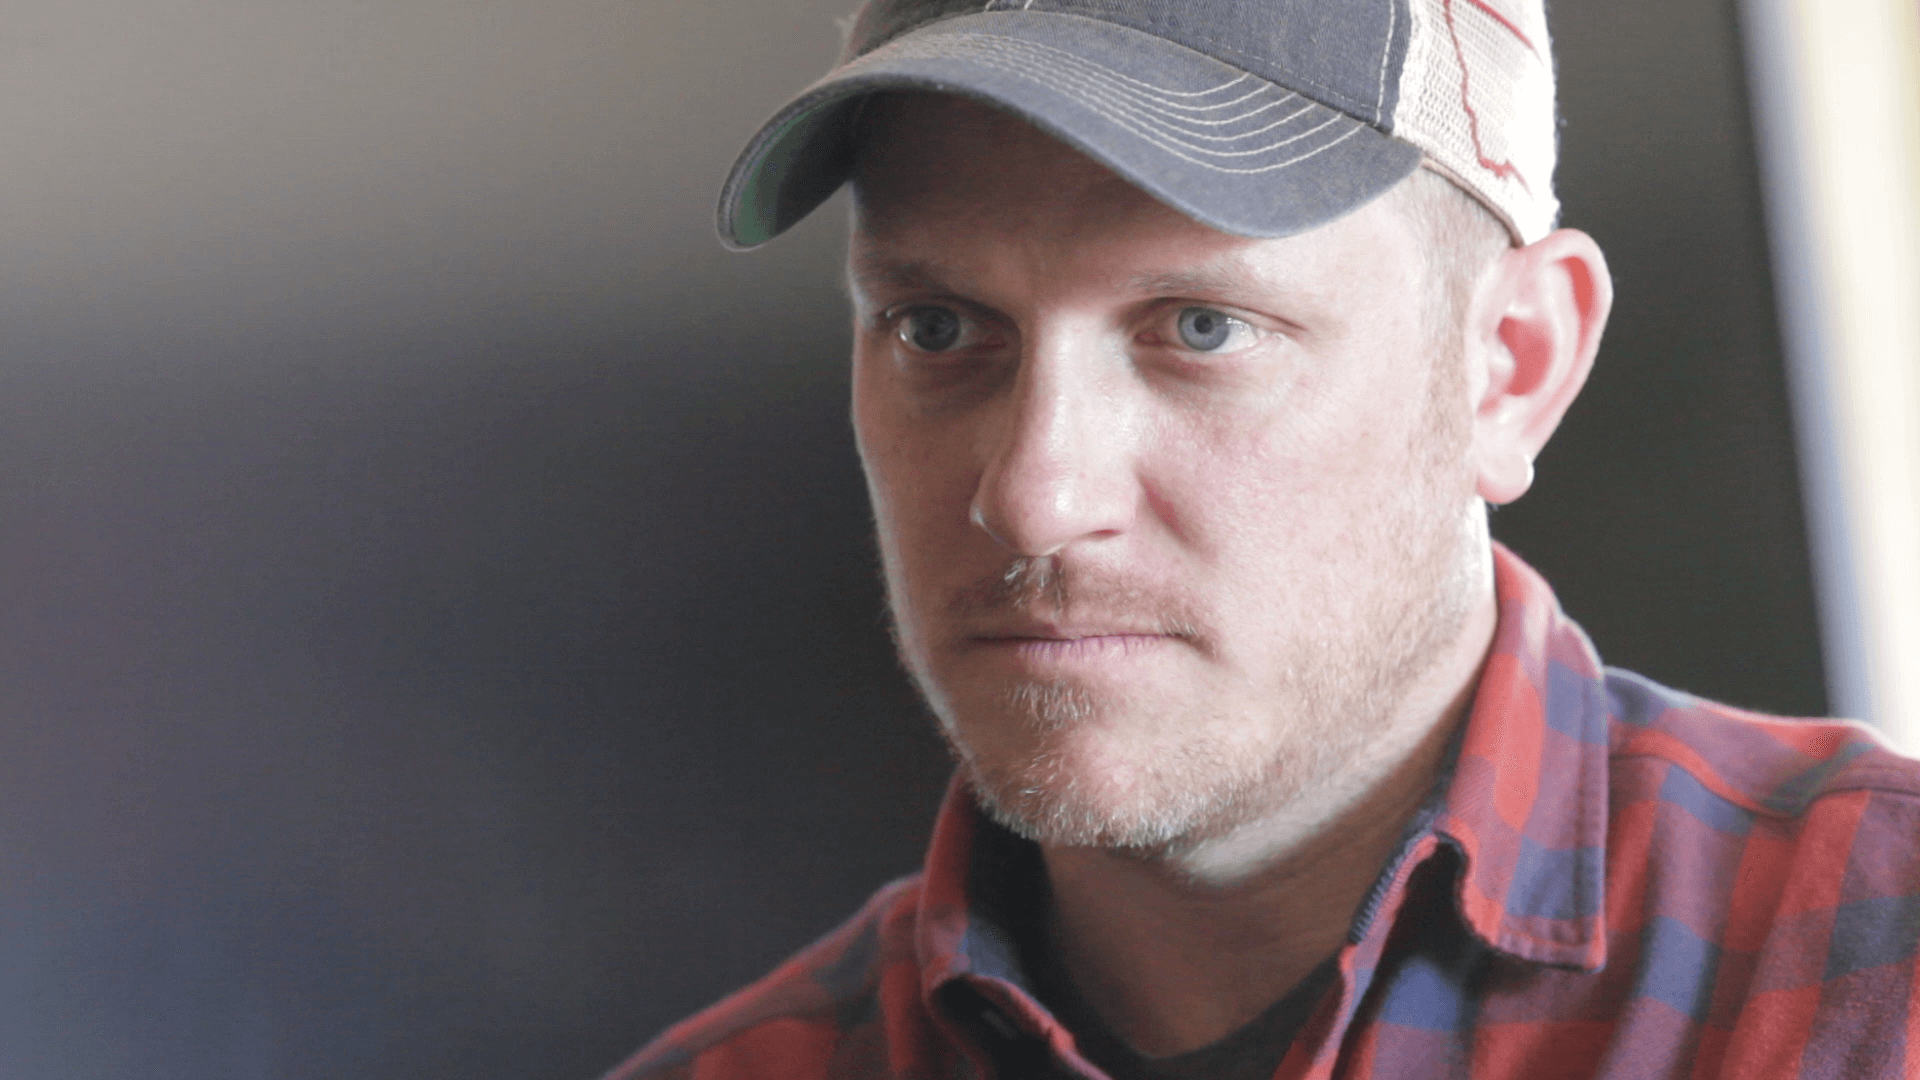 A man looks away from the camera. He wears a plaid shirt and a cap.